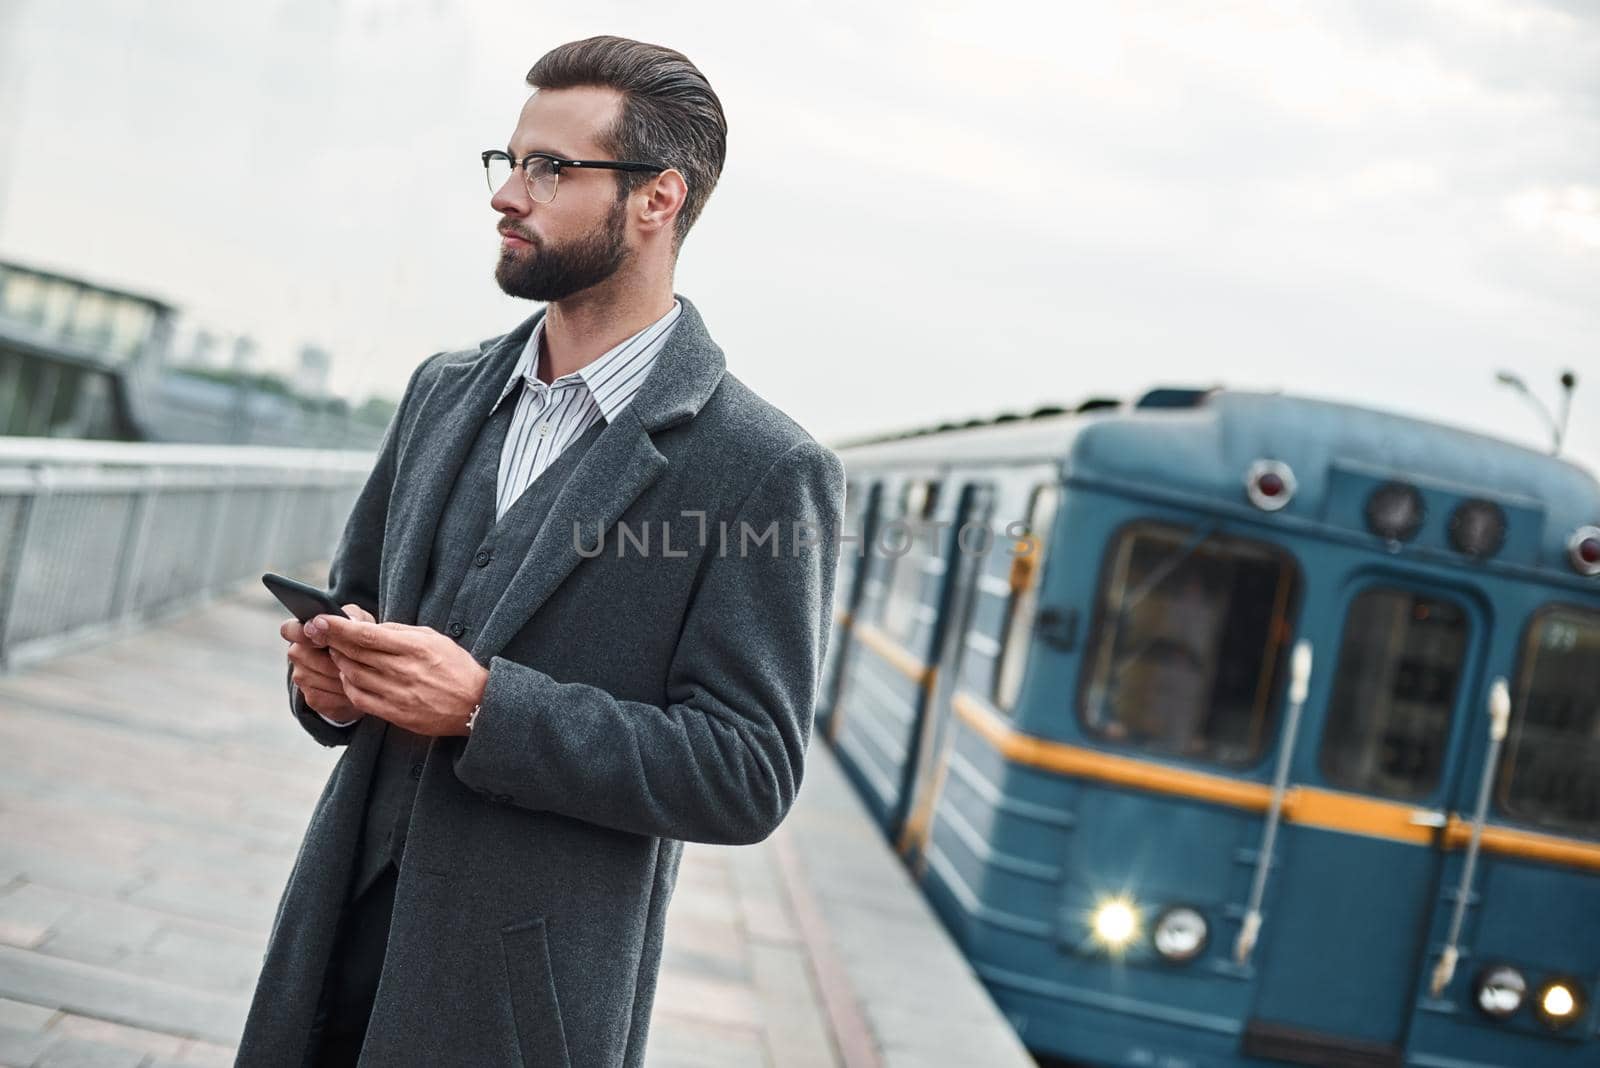 Business trip. Young businessman standing near railway holding smartphone looking aside pensive by friendsstock